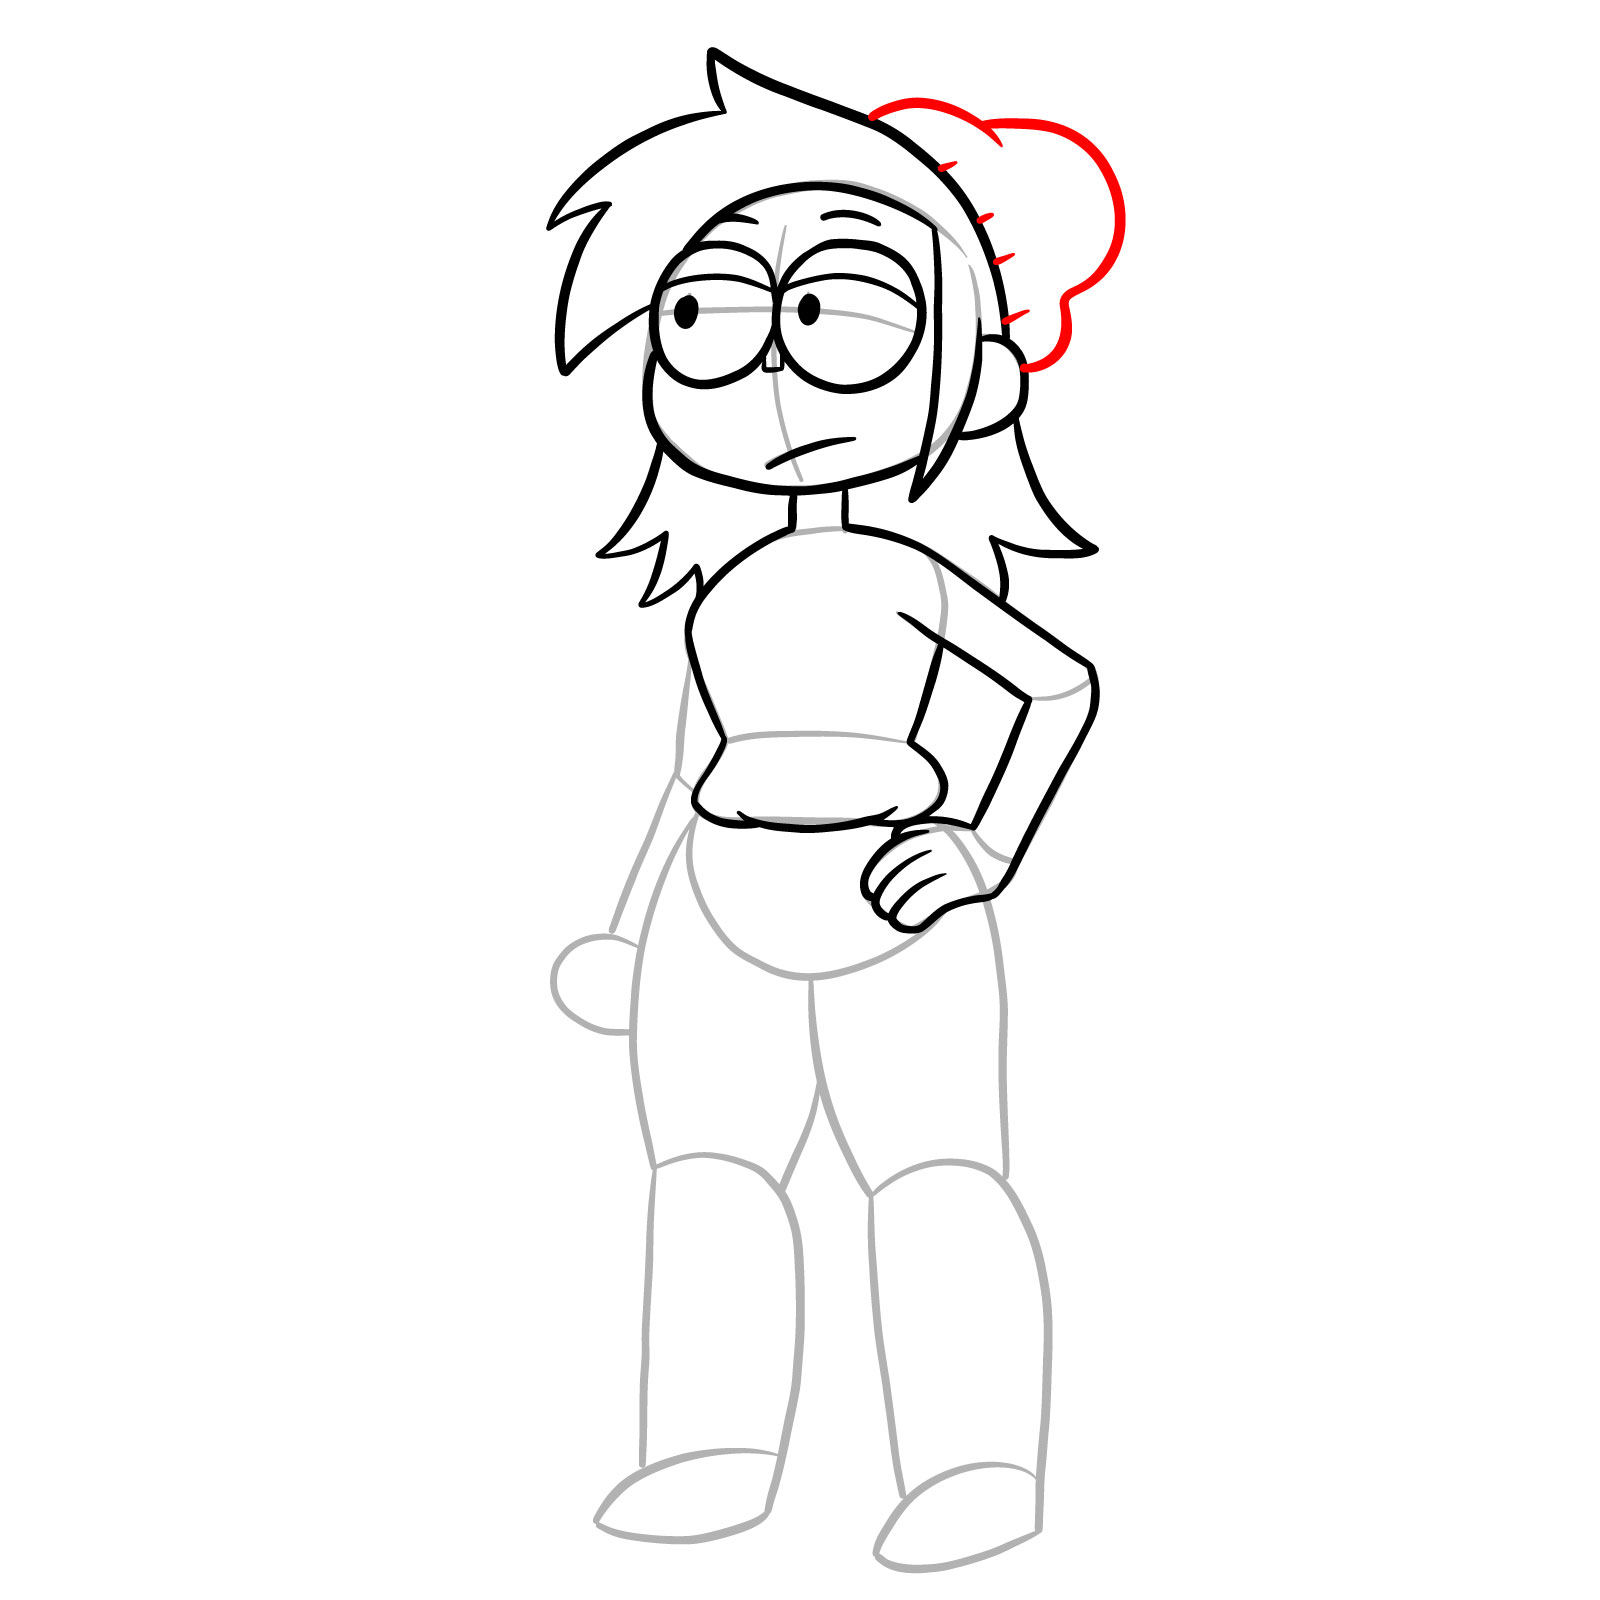 How to draw Actor Enid from OK K.O.! - step 15